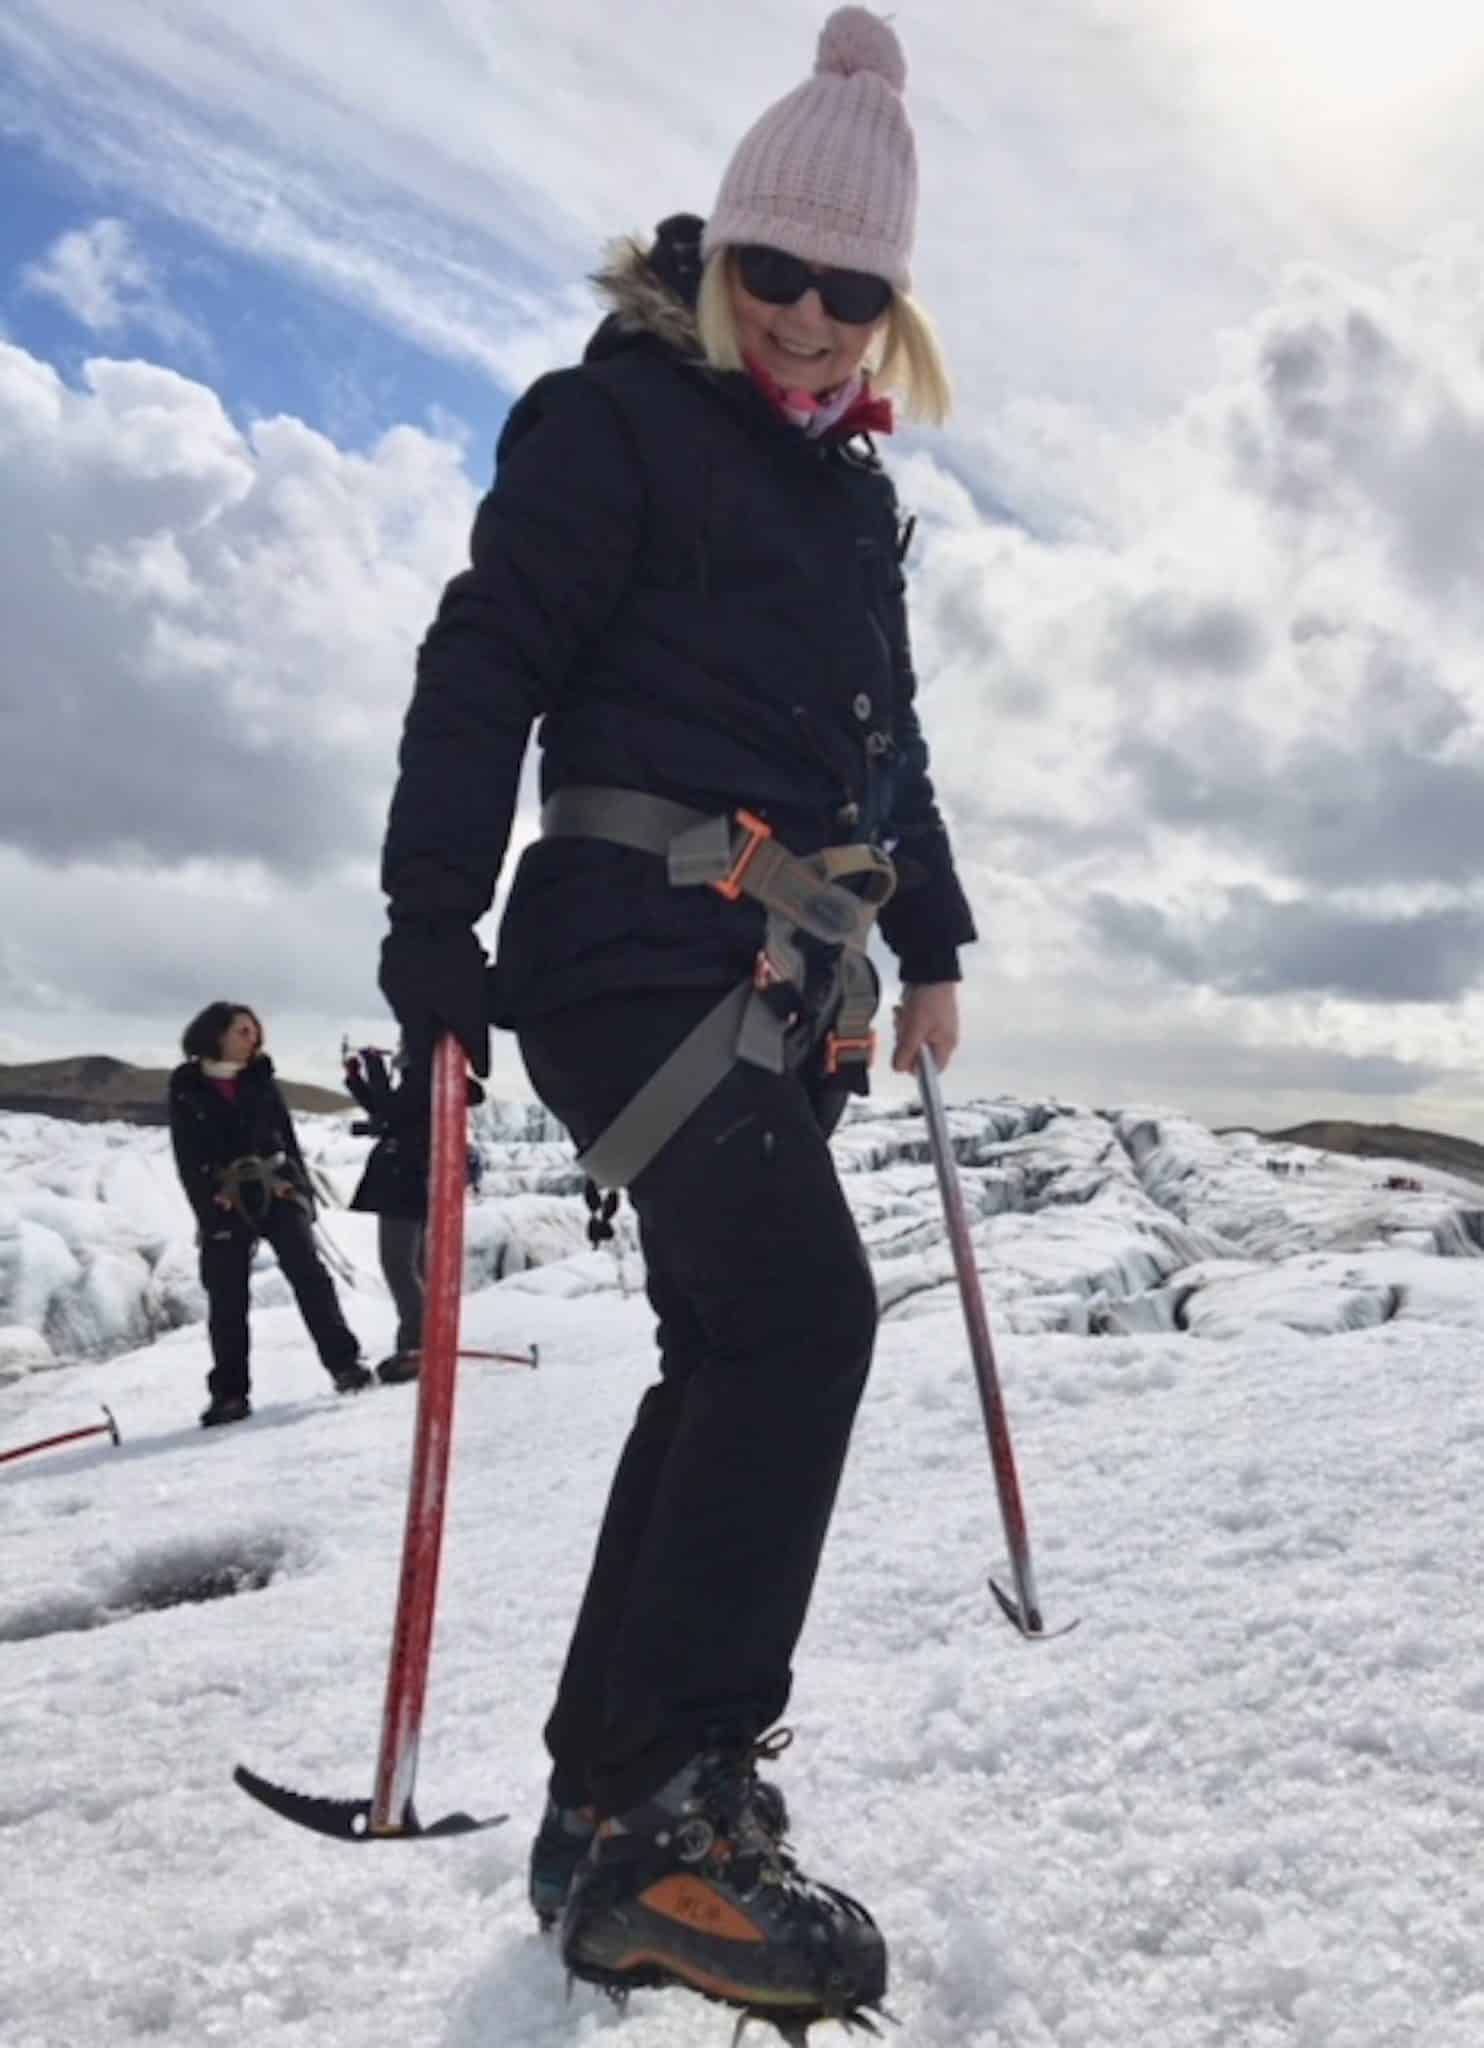 Find out how 55 year old Catherine enjoys fabulous holidays after cancer: Catherine Byrne glacier walking